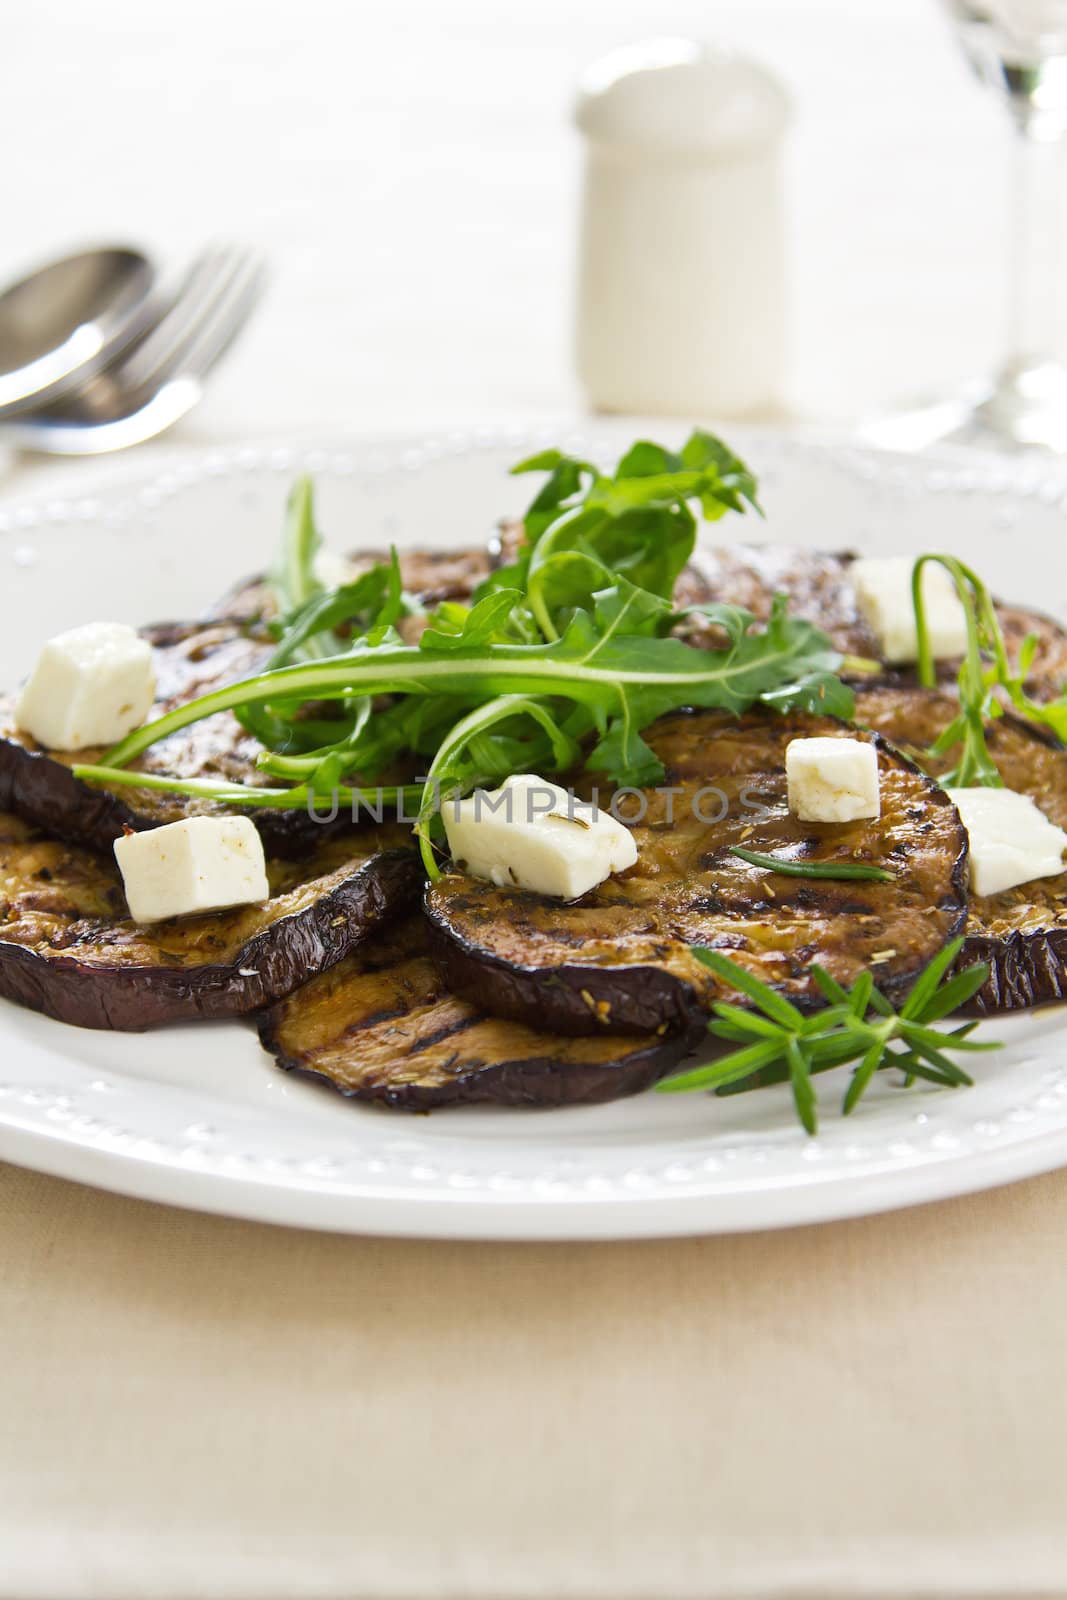 Grilled Aubergine with Feta cheese salad by vanillaechoes